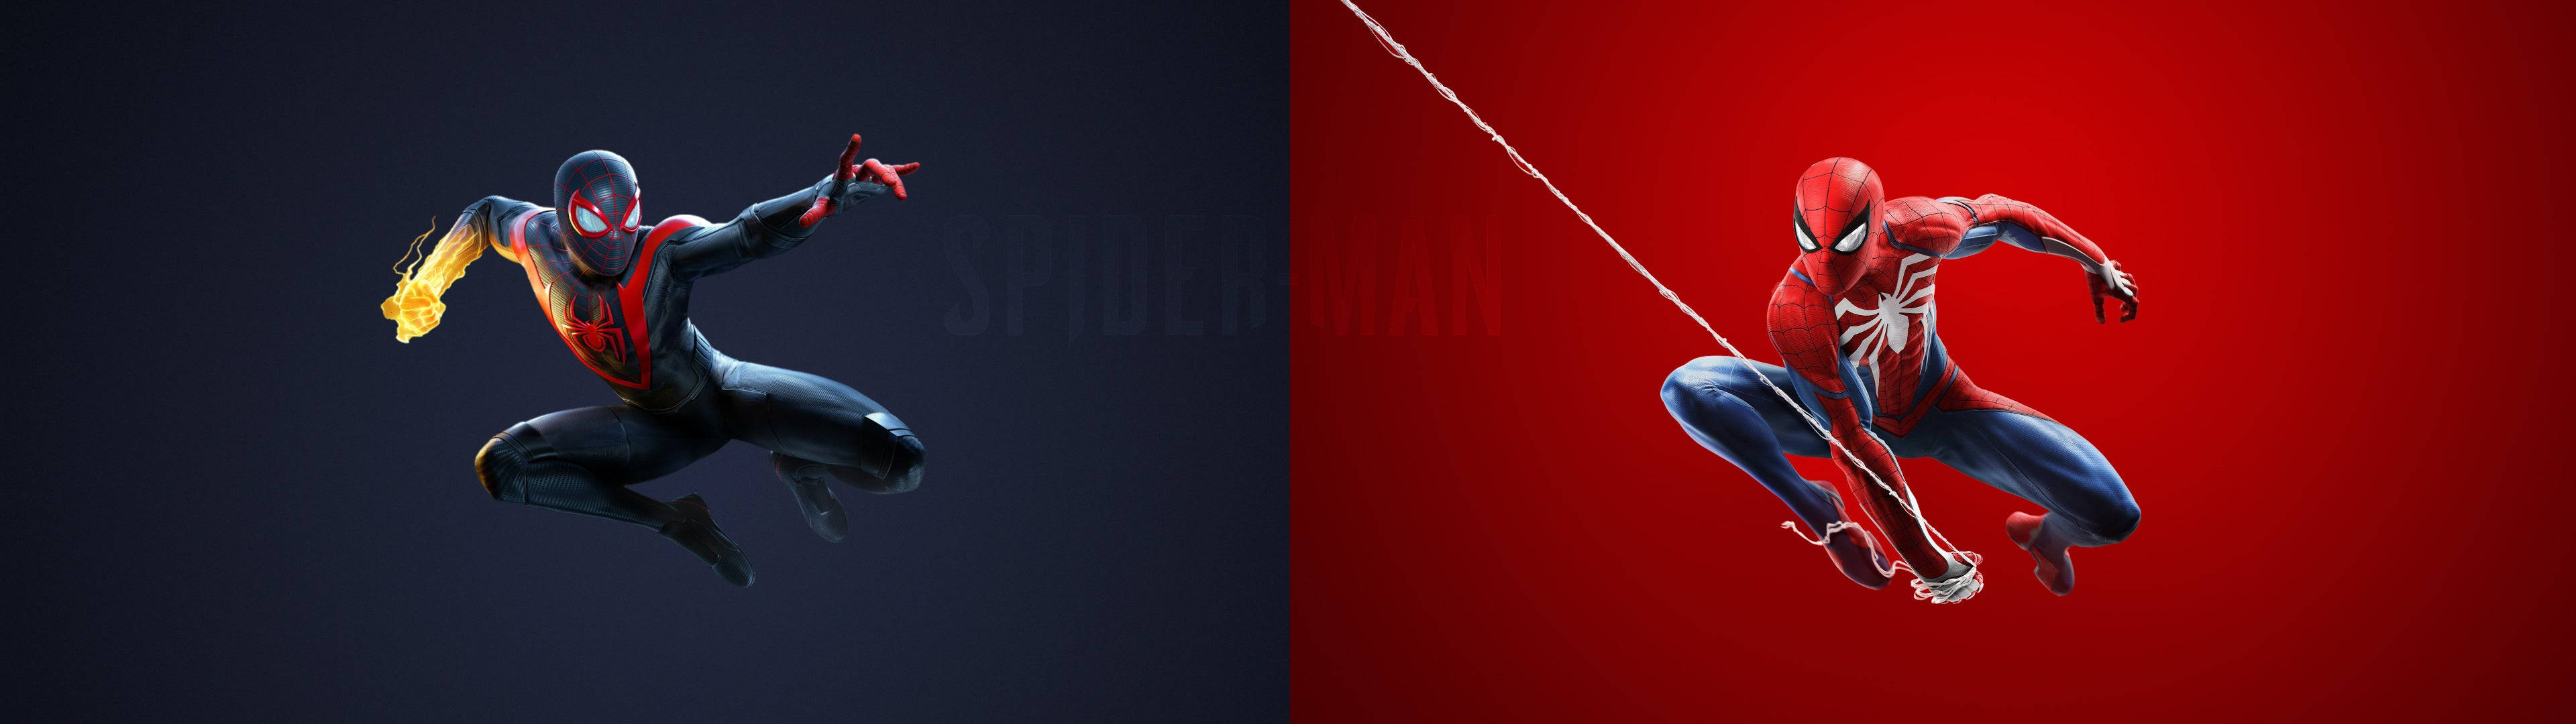 Spider Man Miles Morales Collage Ps5 Wallpaper